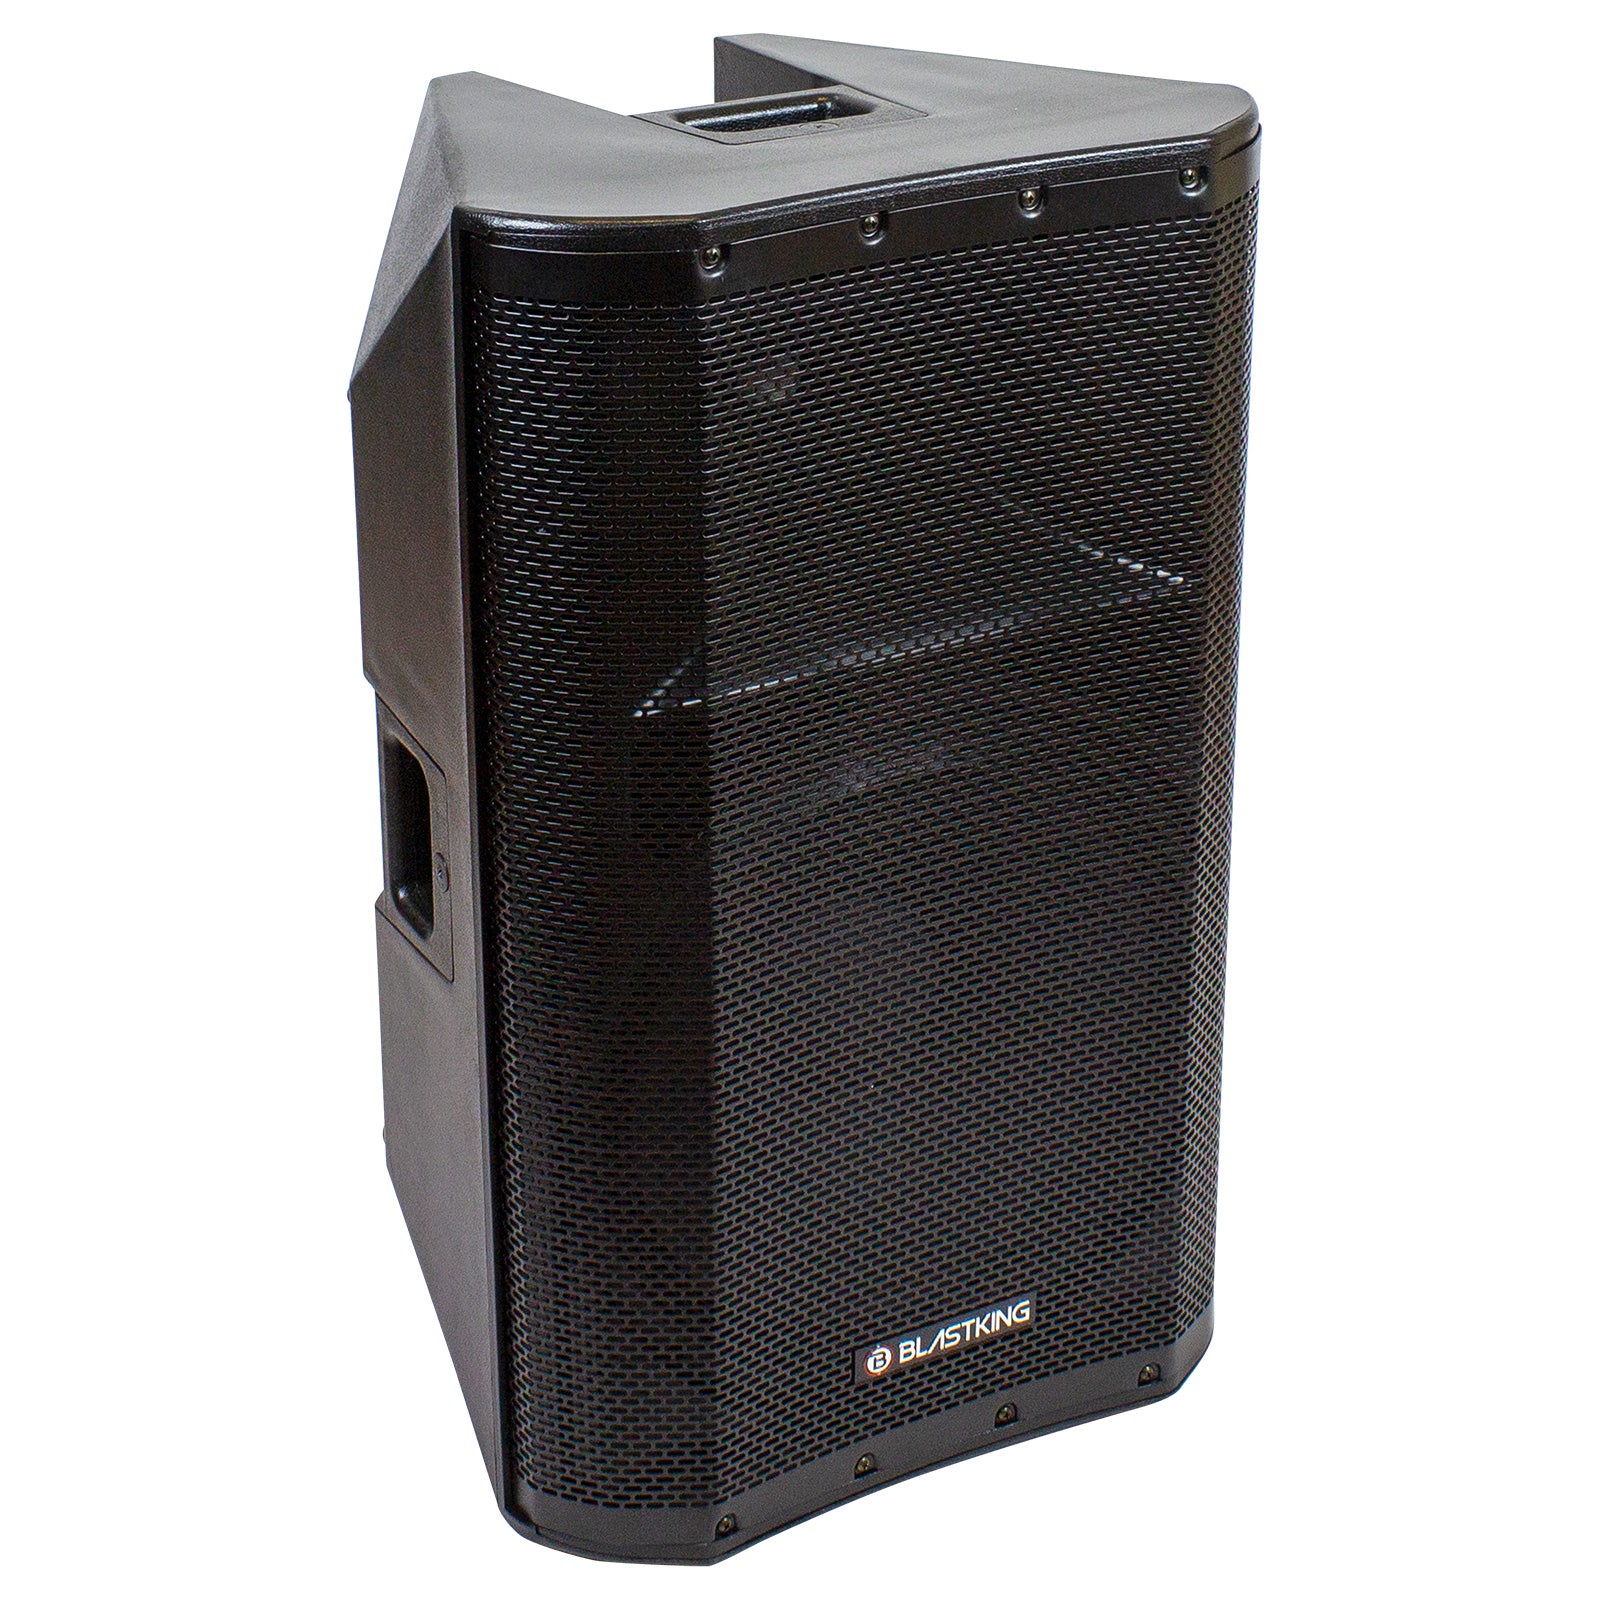 Blastking XS215A 1000 Watts 15 inch 2-way Active Loudspeaker w/Bluetooth and MP3 Player